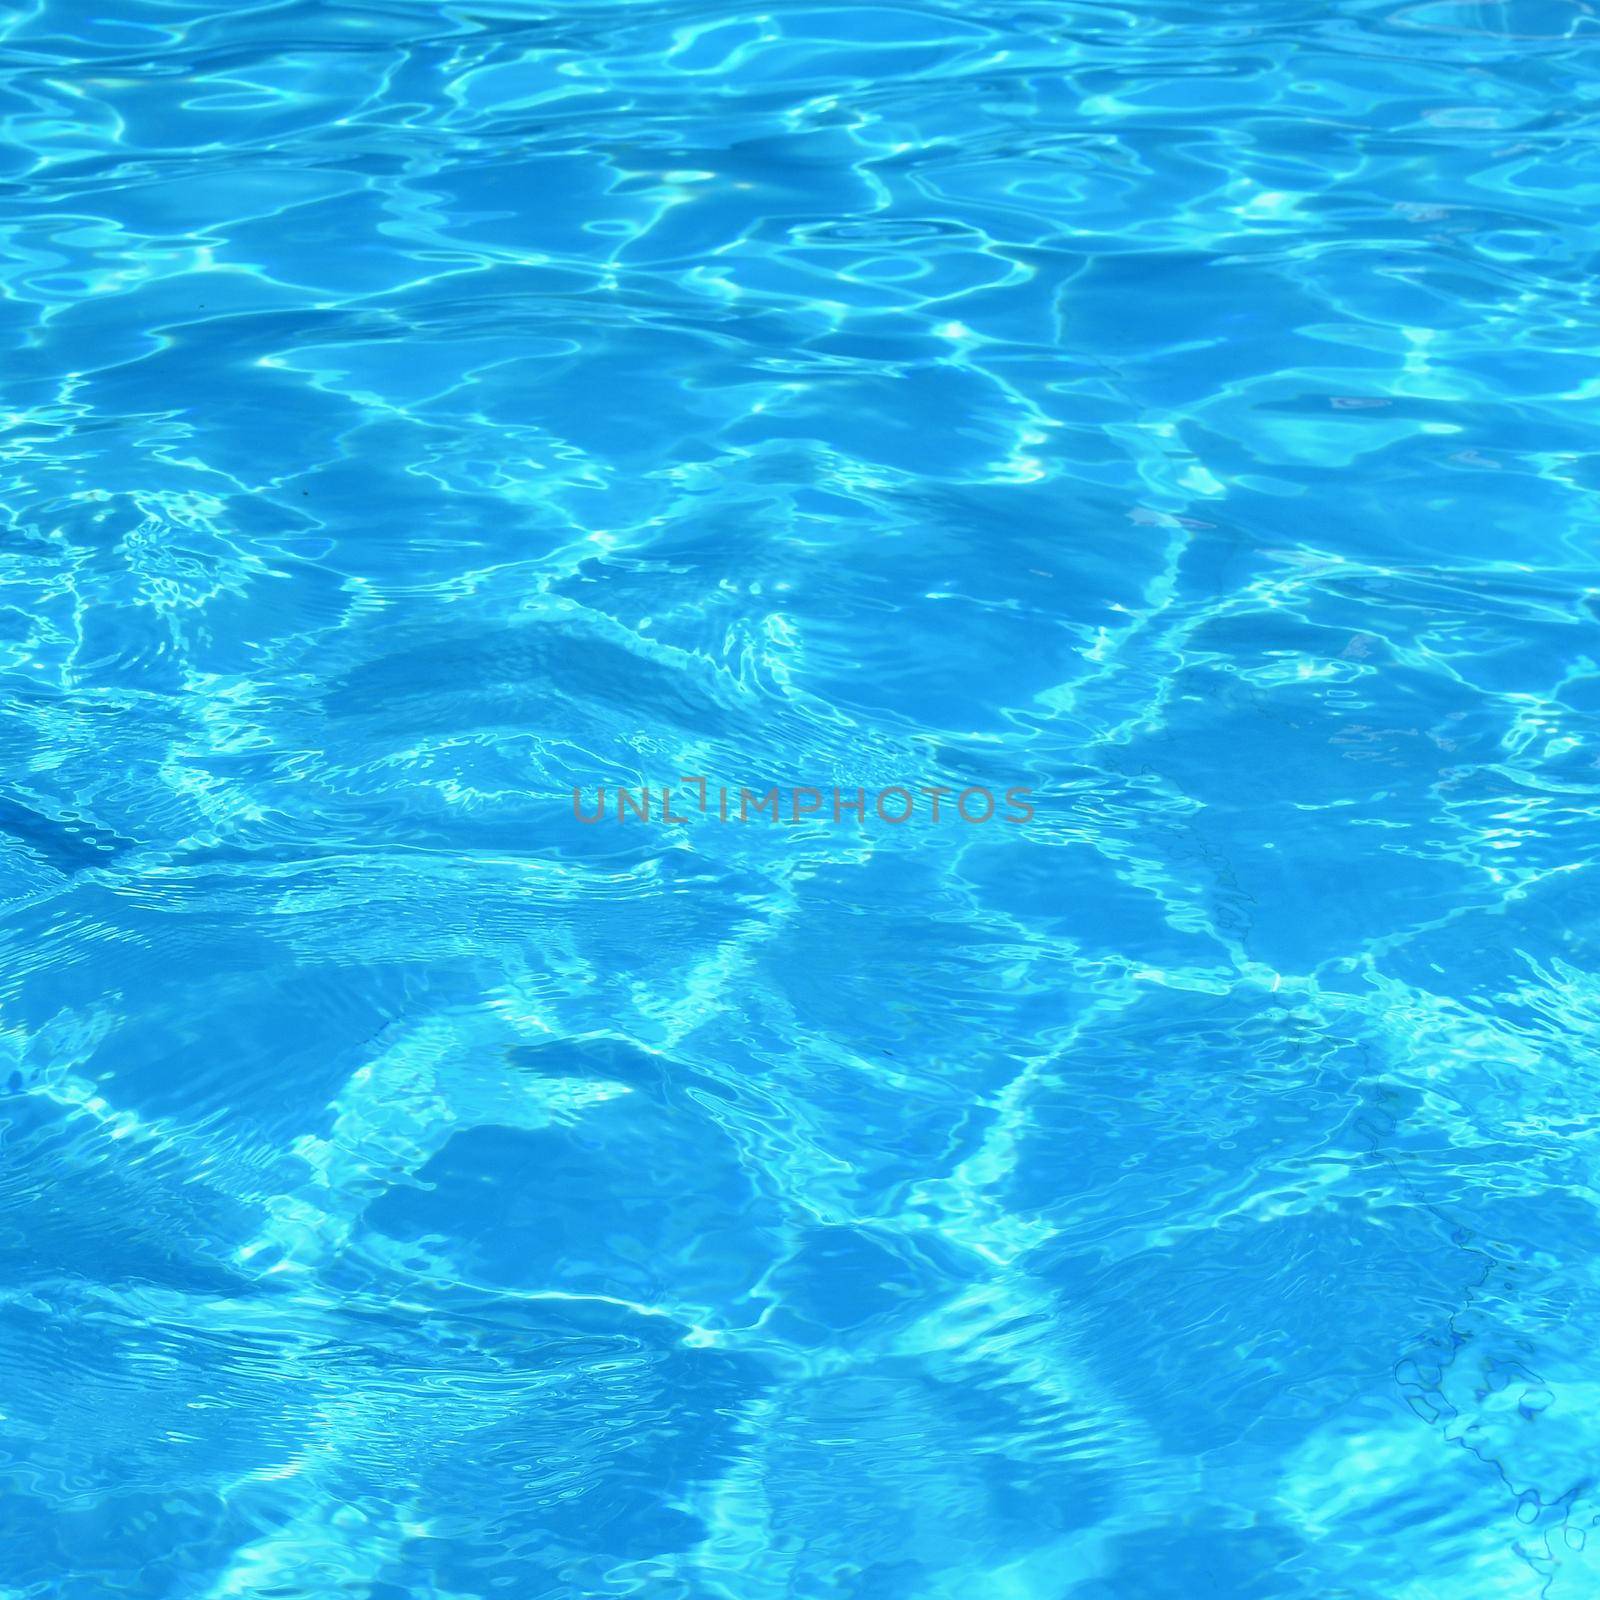 Pool with clean water. Summer background for traveling.